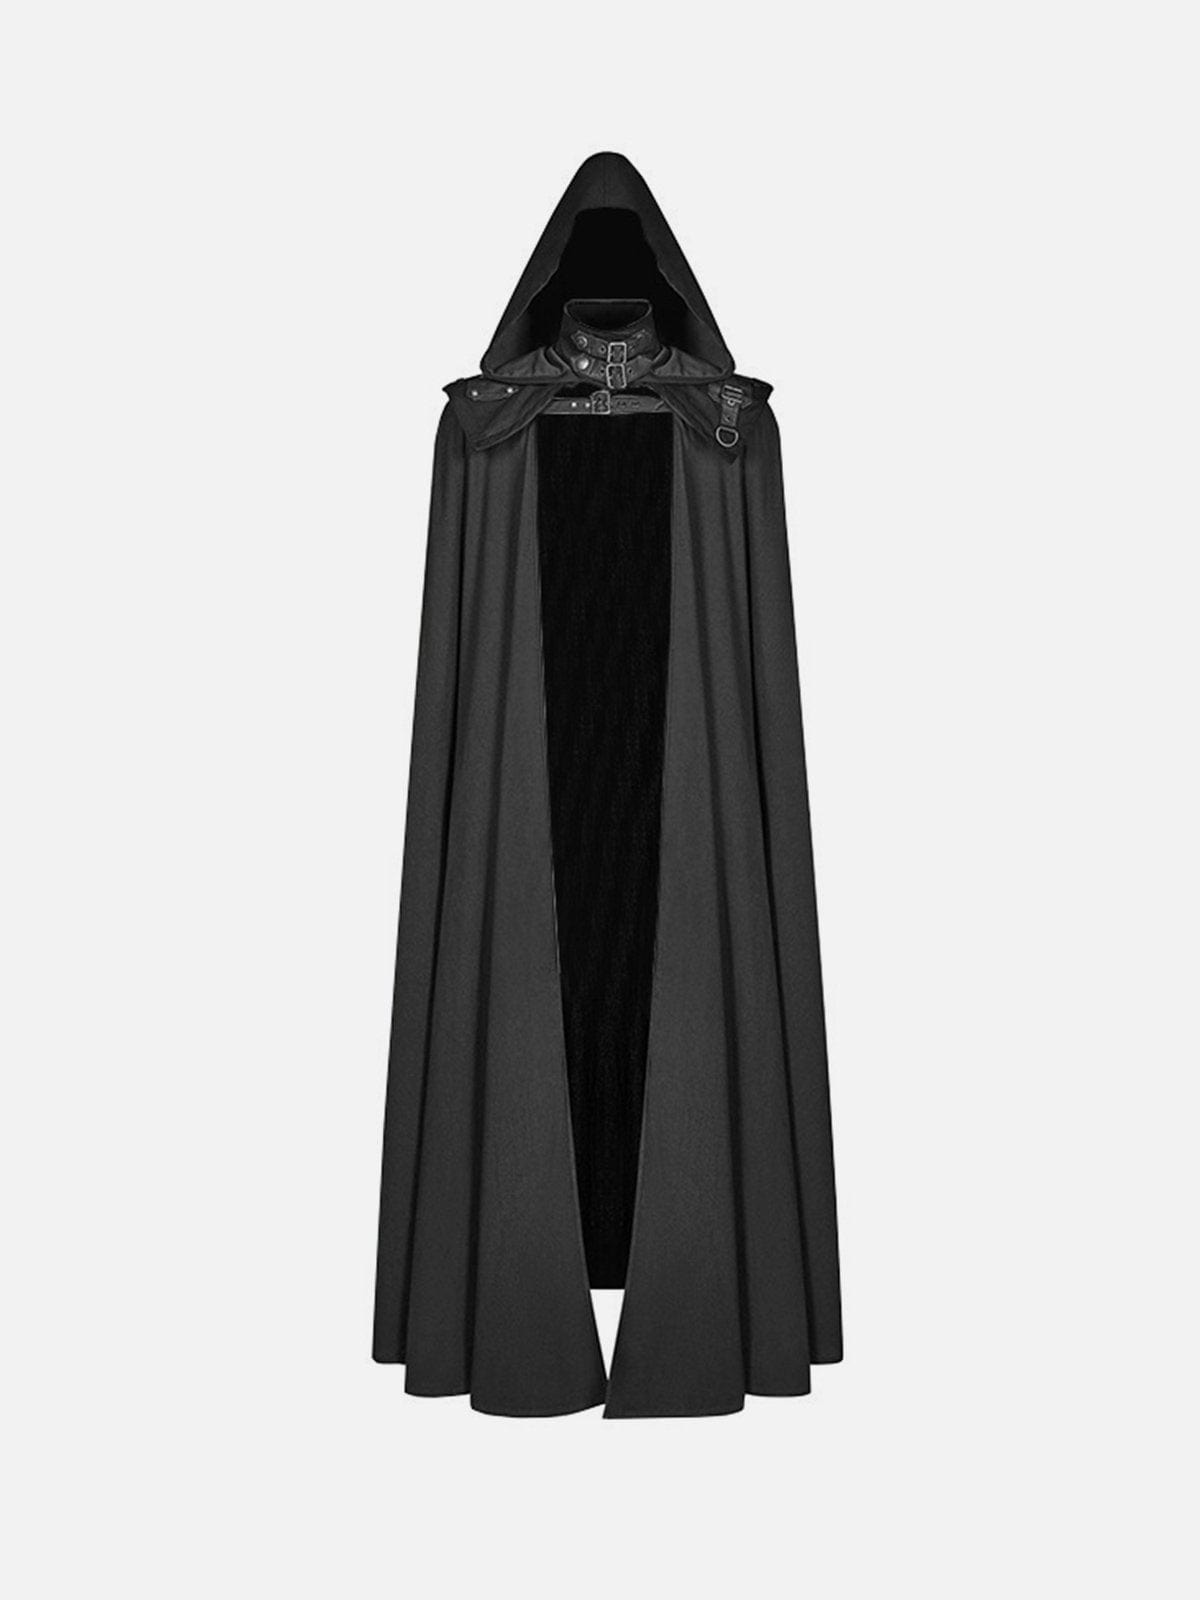 NEV Ancient Wizard’s Cape